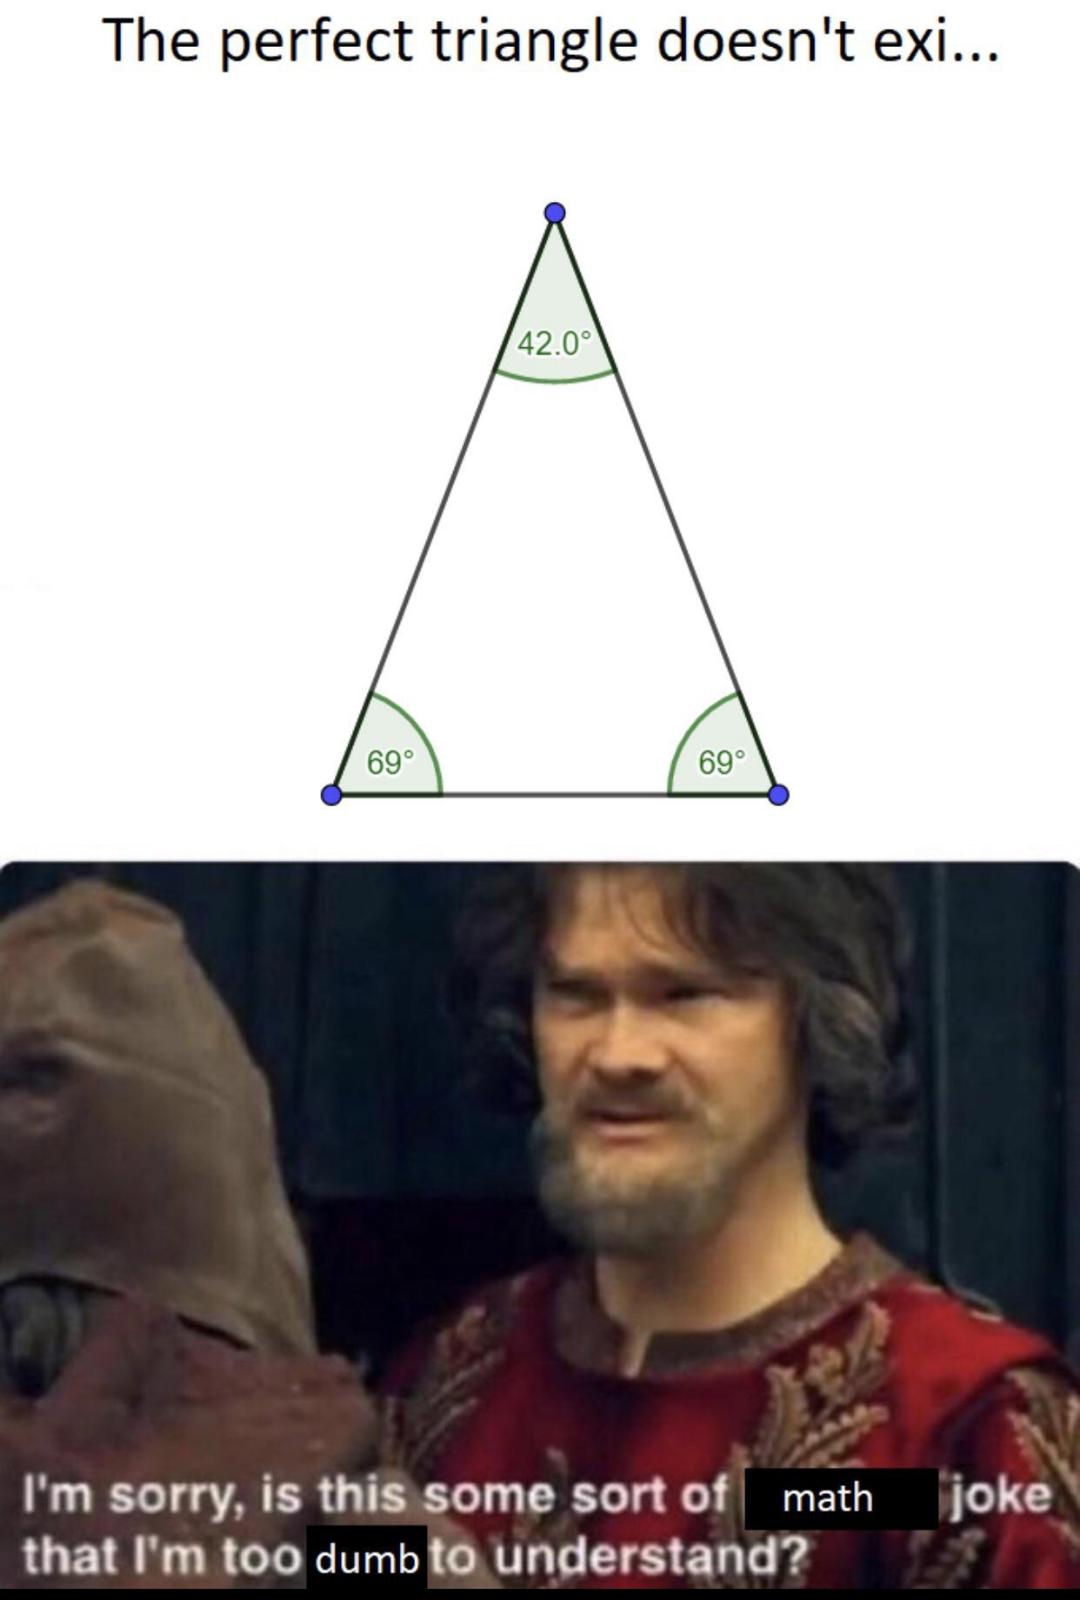 dank memes - funny memes - 69 69 420 triangle - The perfect triangle doesn't exi... 42.0 69 89 I'm sorry, is this some sort of math that I'm too dumb to understand? joke